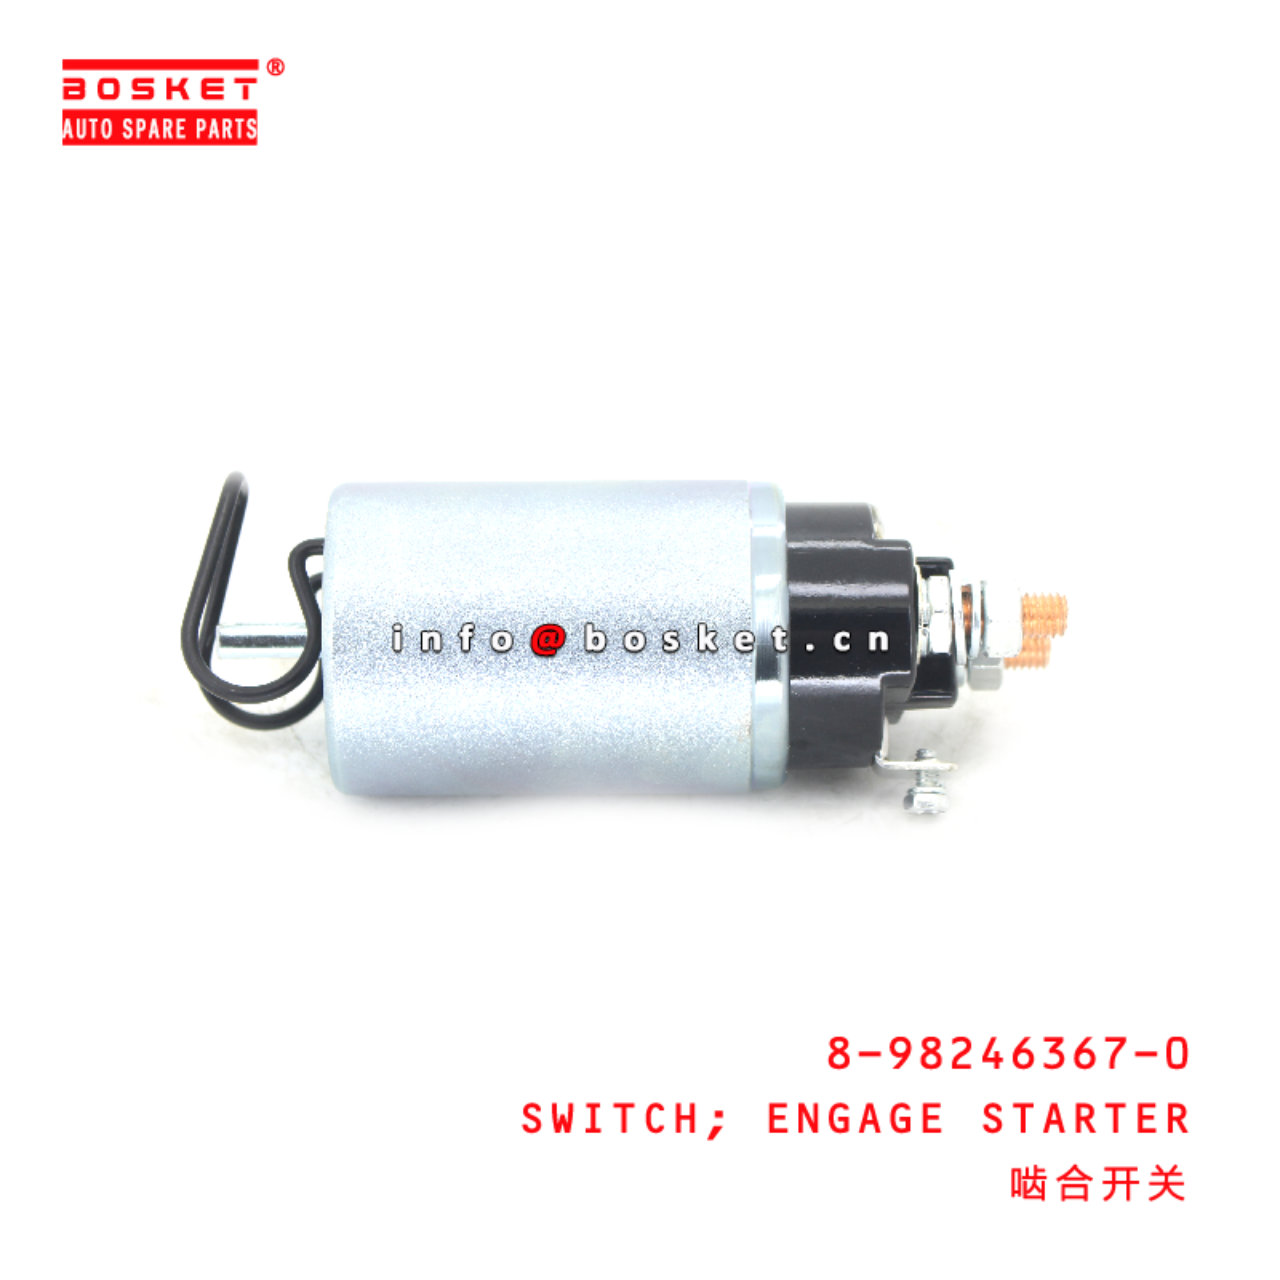 8-98246367-0 Engage Starter Switch suitable for ISUZU 700P 4HK1 8982463670